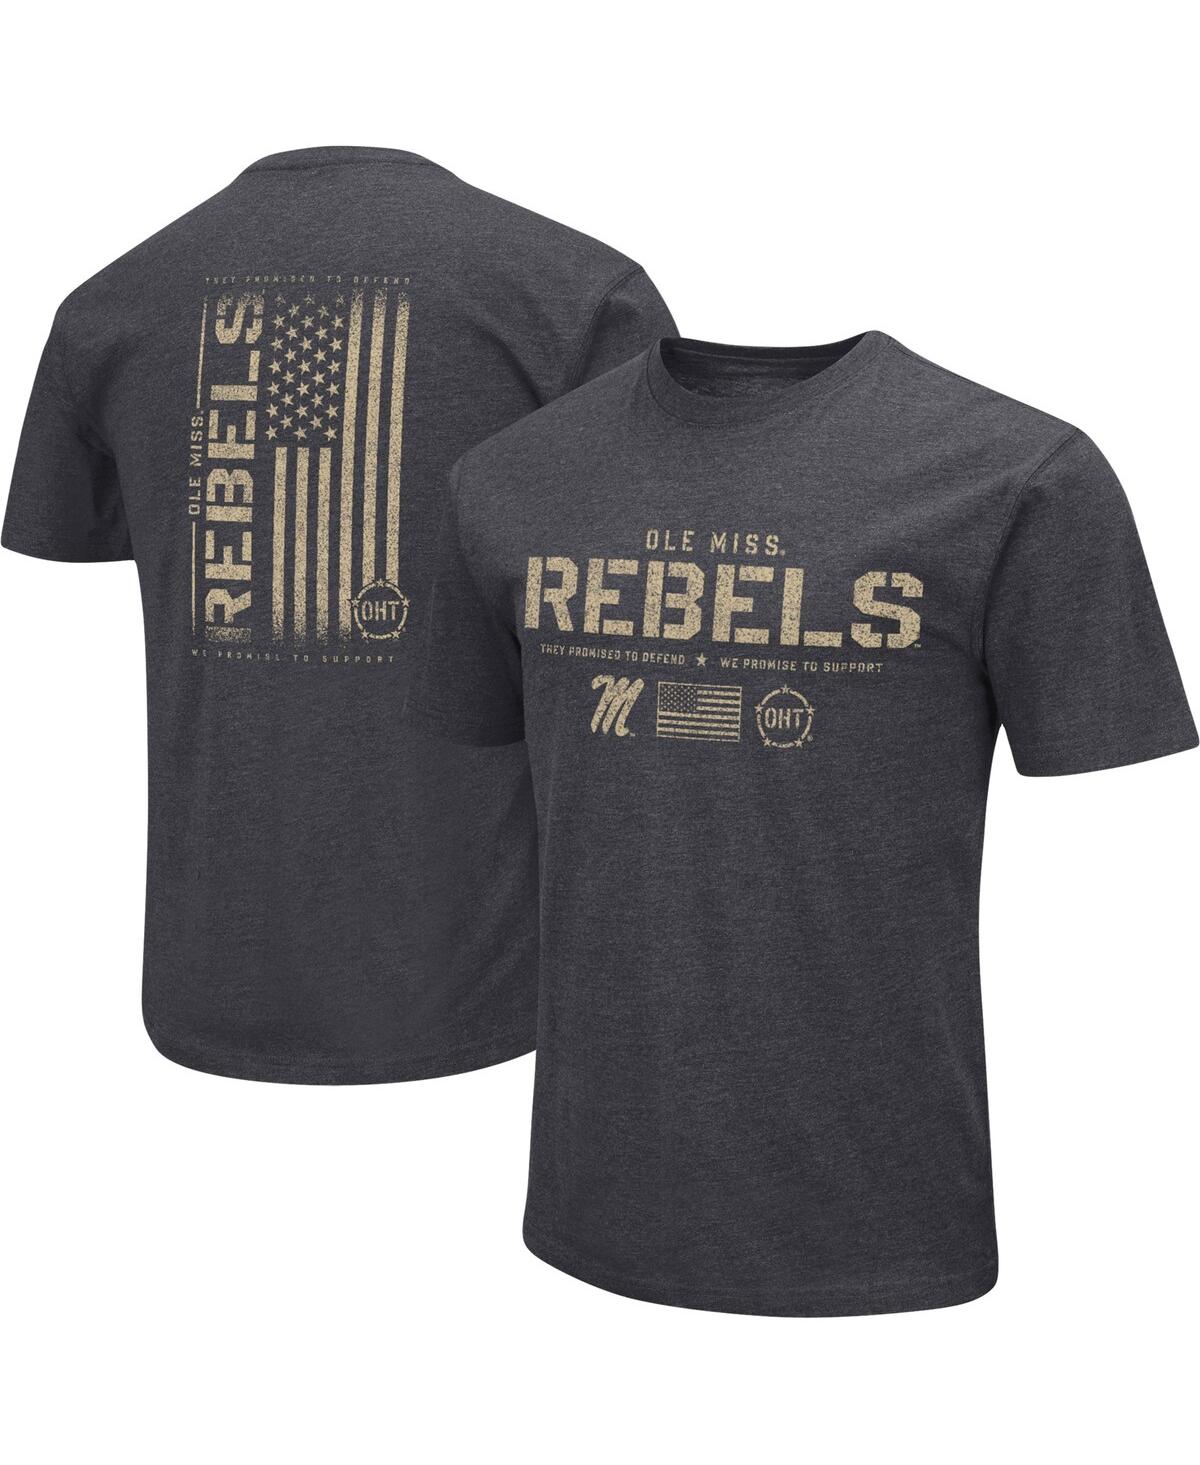 Men's Colosseum Heather Black Ole Miss Rebels Big and Tall Oht Military-Inspired Appreciation Playbook T-shirt - Heather Black